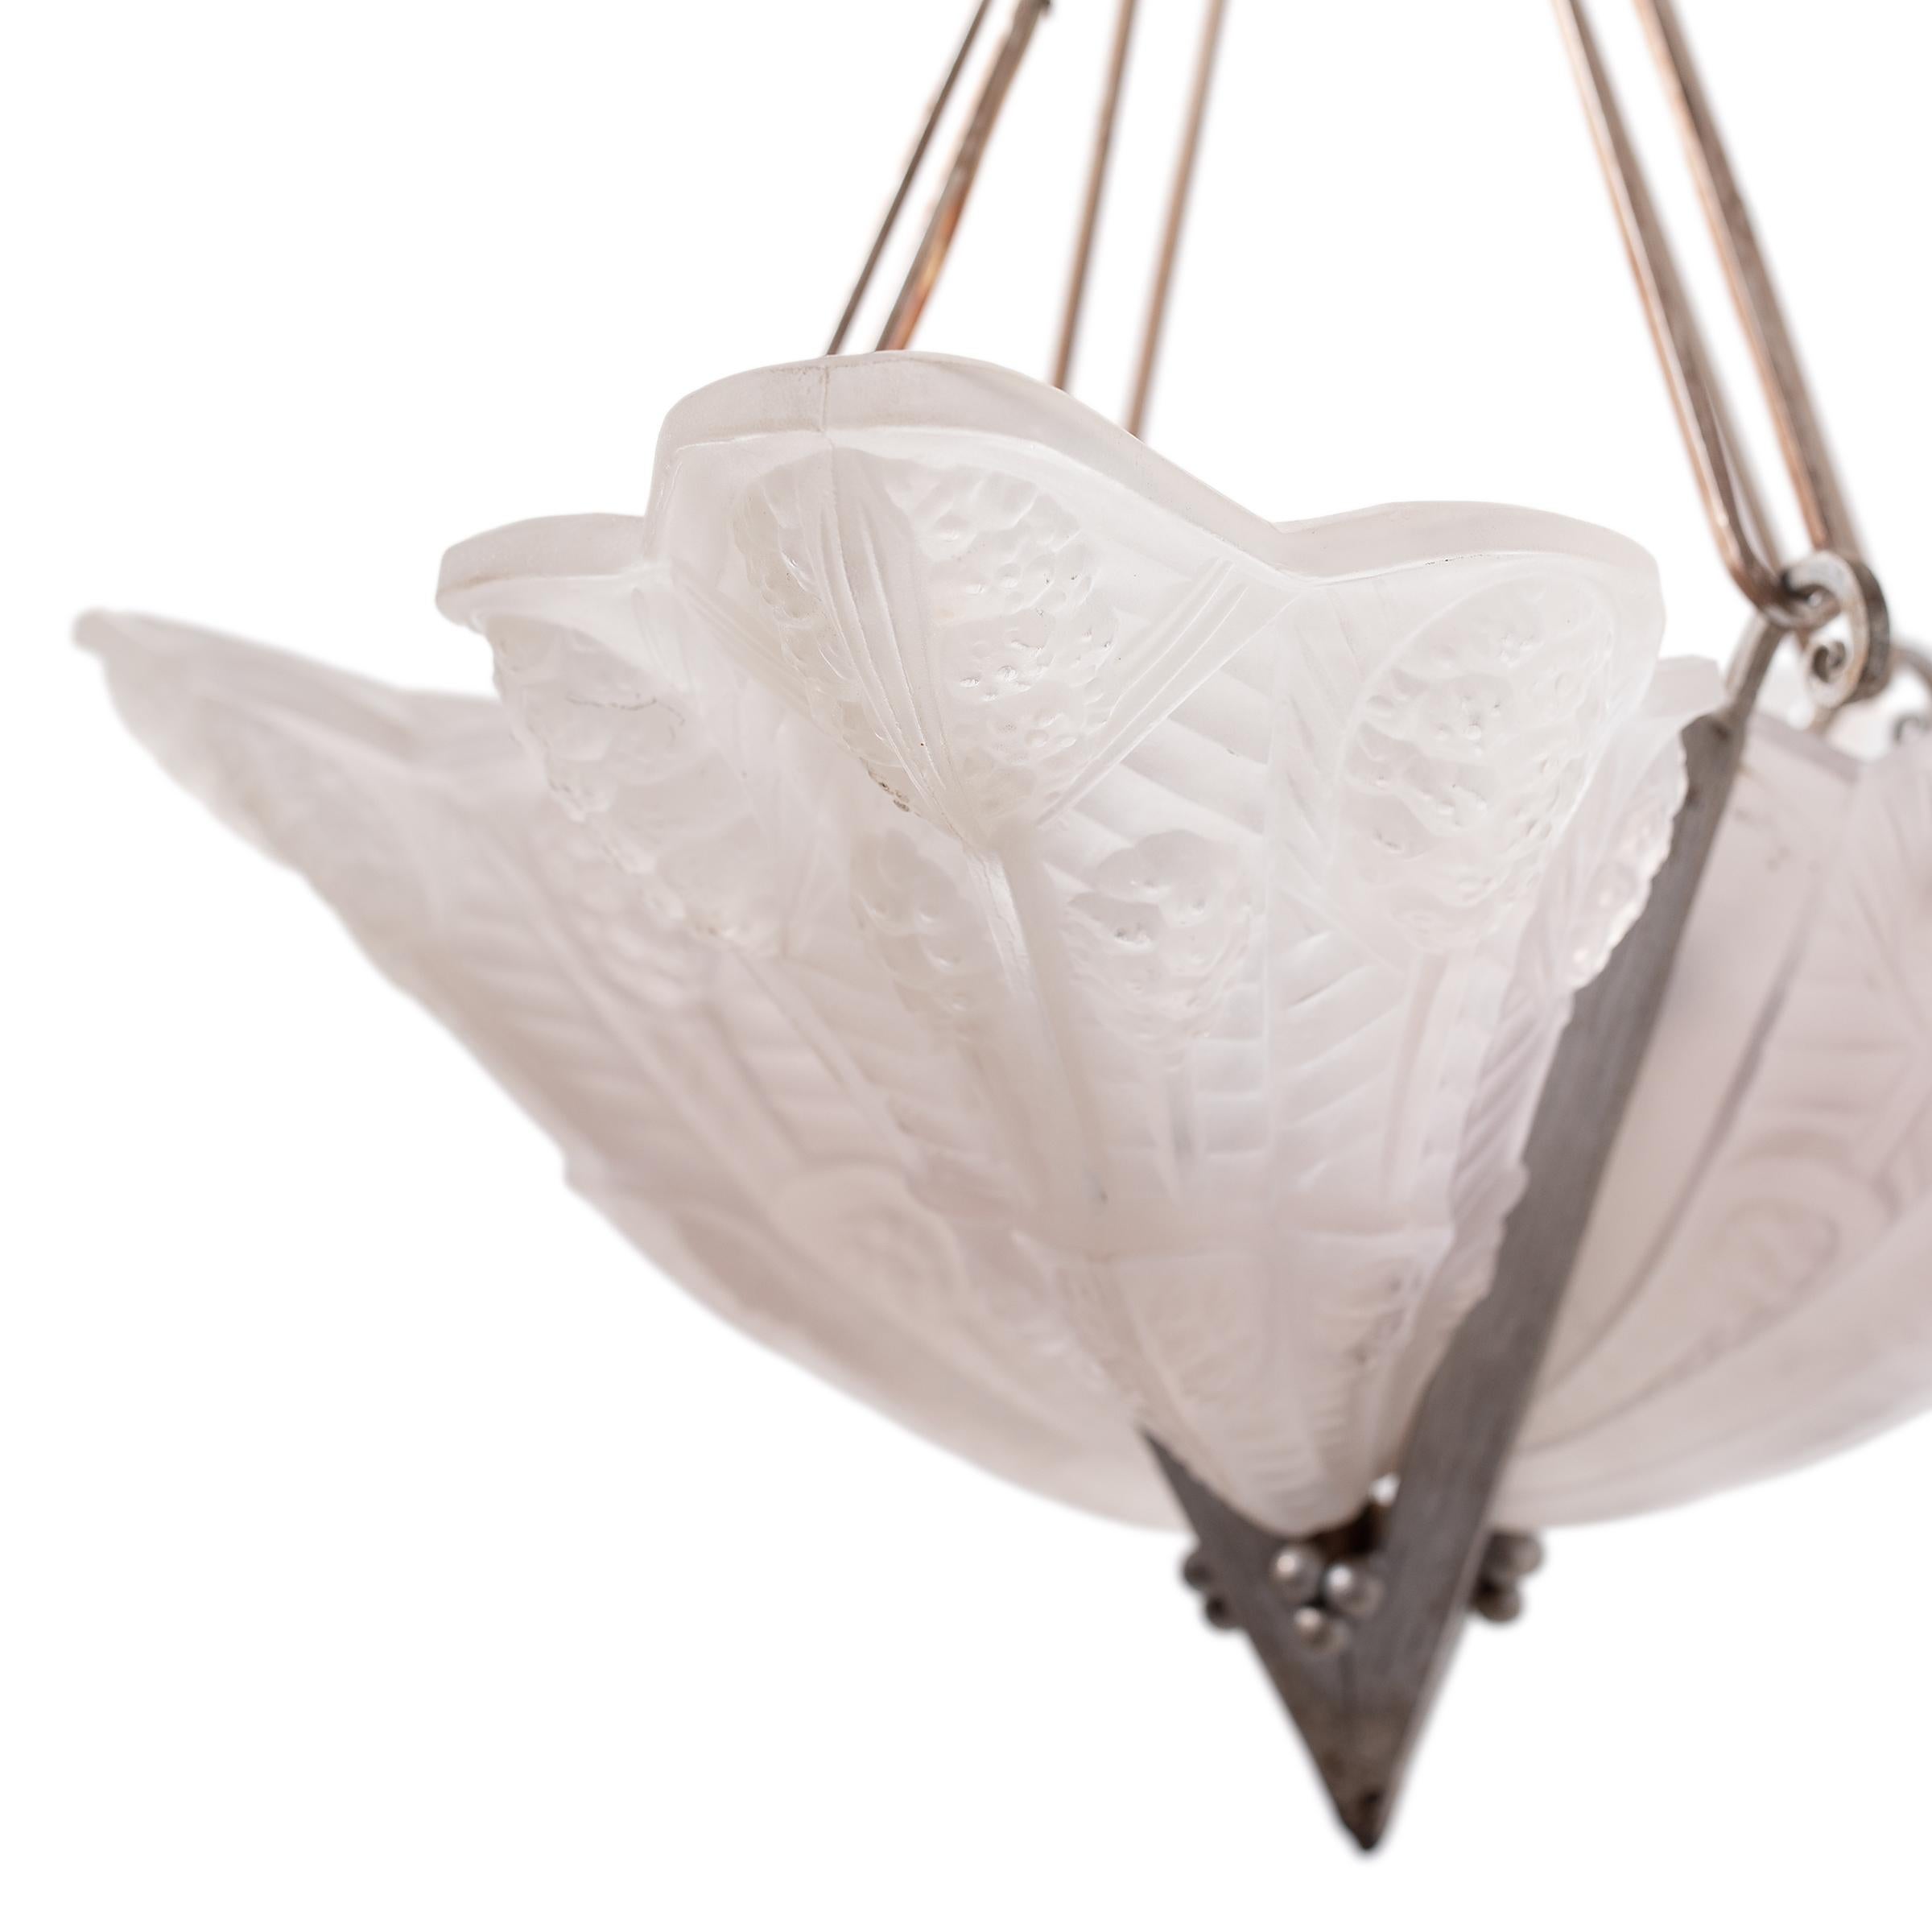 20th Century French Art Deco Frosted Glass Pendant Light, c. 1930 For Sale